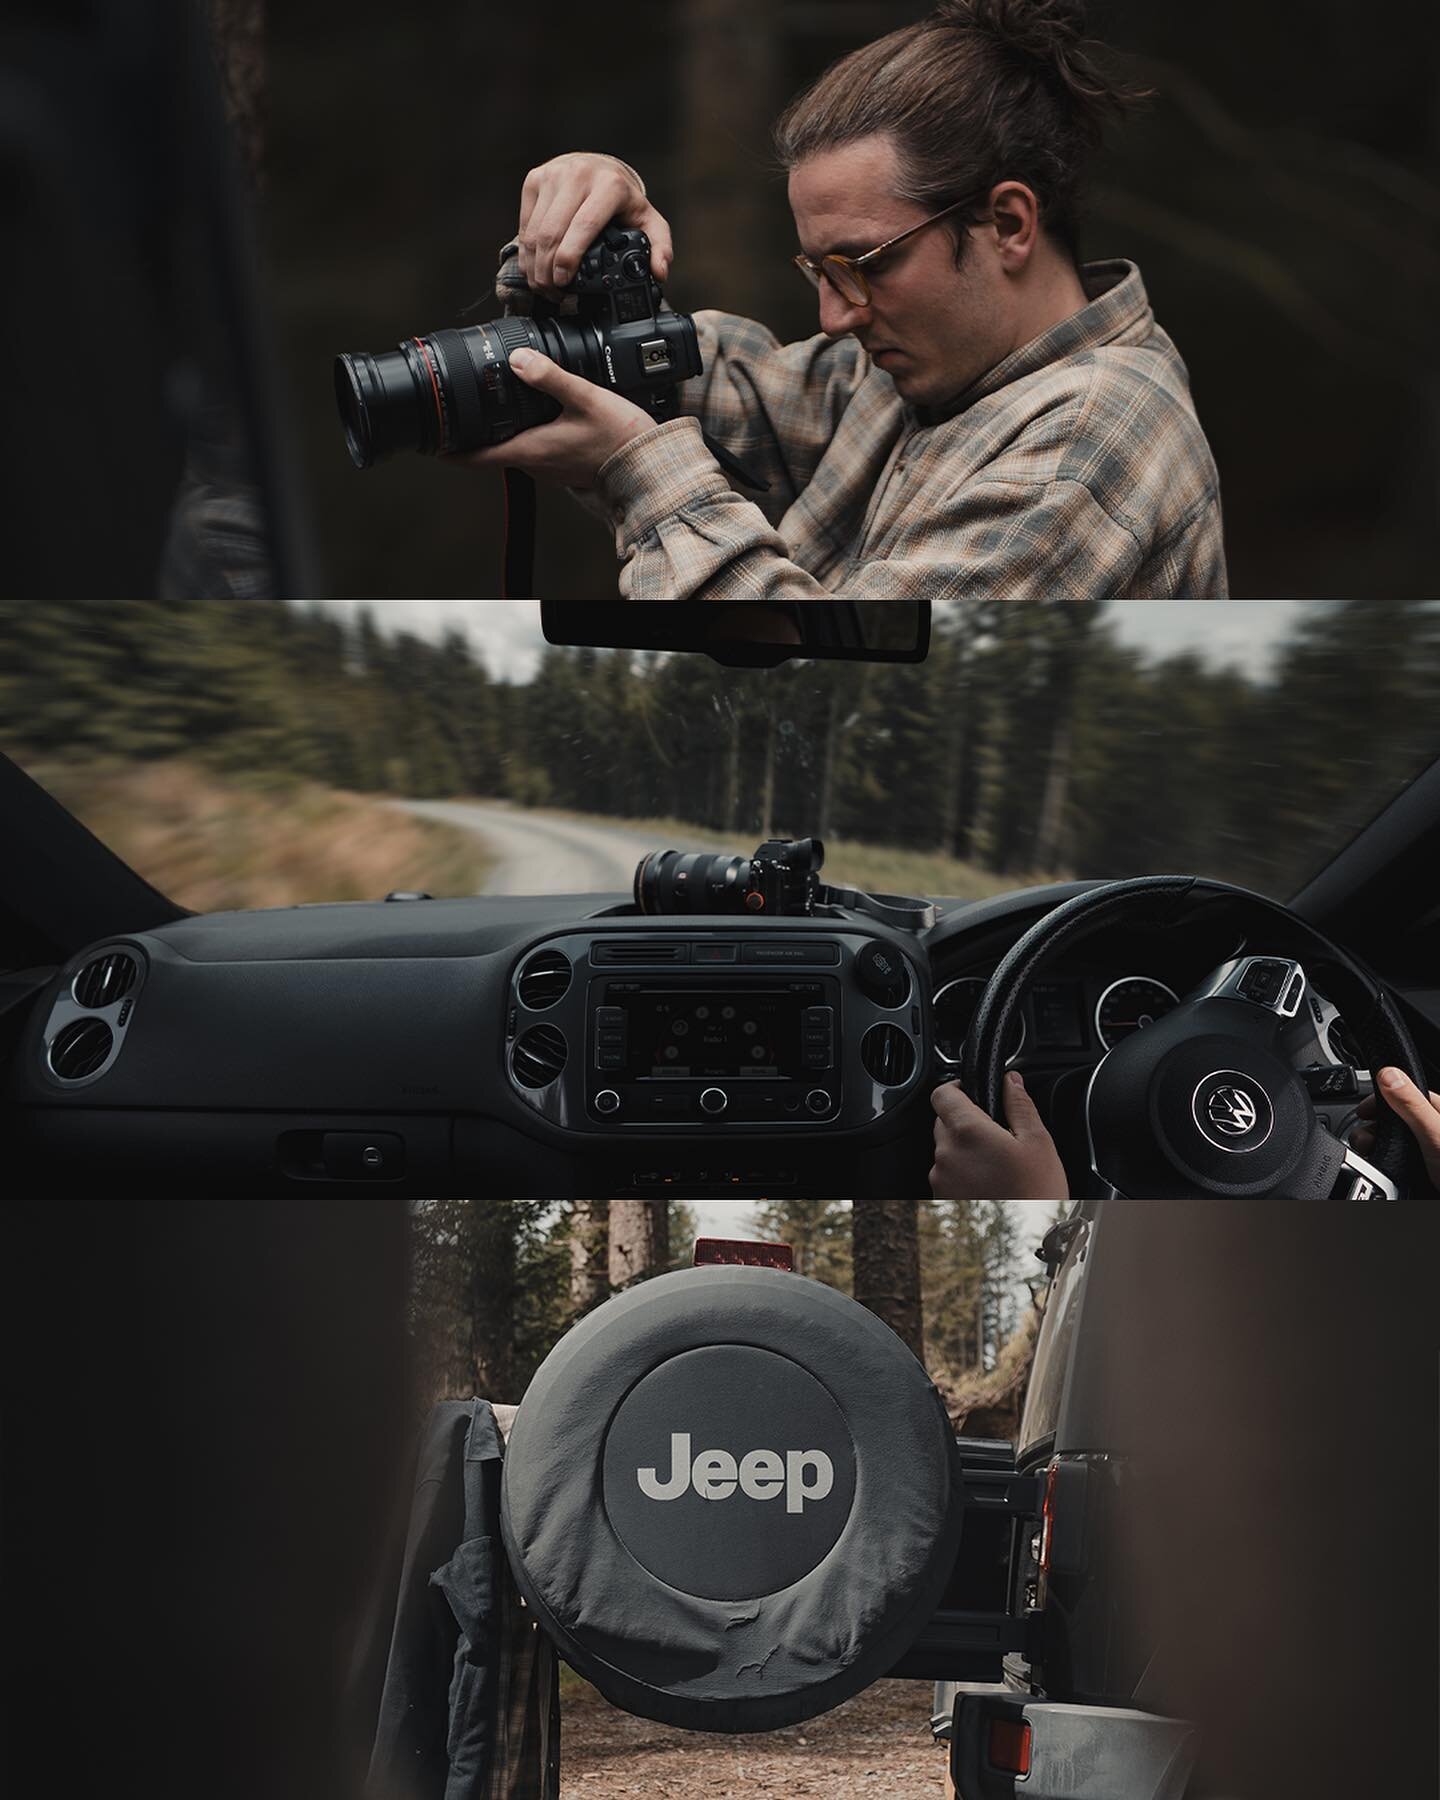 Another set from the archive! (Can you tell the end of the year is coming?!) this time shooting some BTS shots for @coiacreative and @calummcvicar, you know it&rsquo;s going to be a great day when the Jeep rolls up!
.
.
.
.
.
#filmmaking #photography